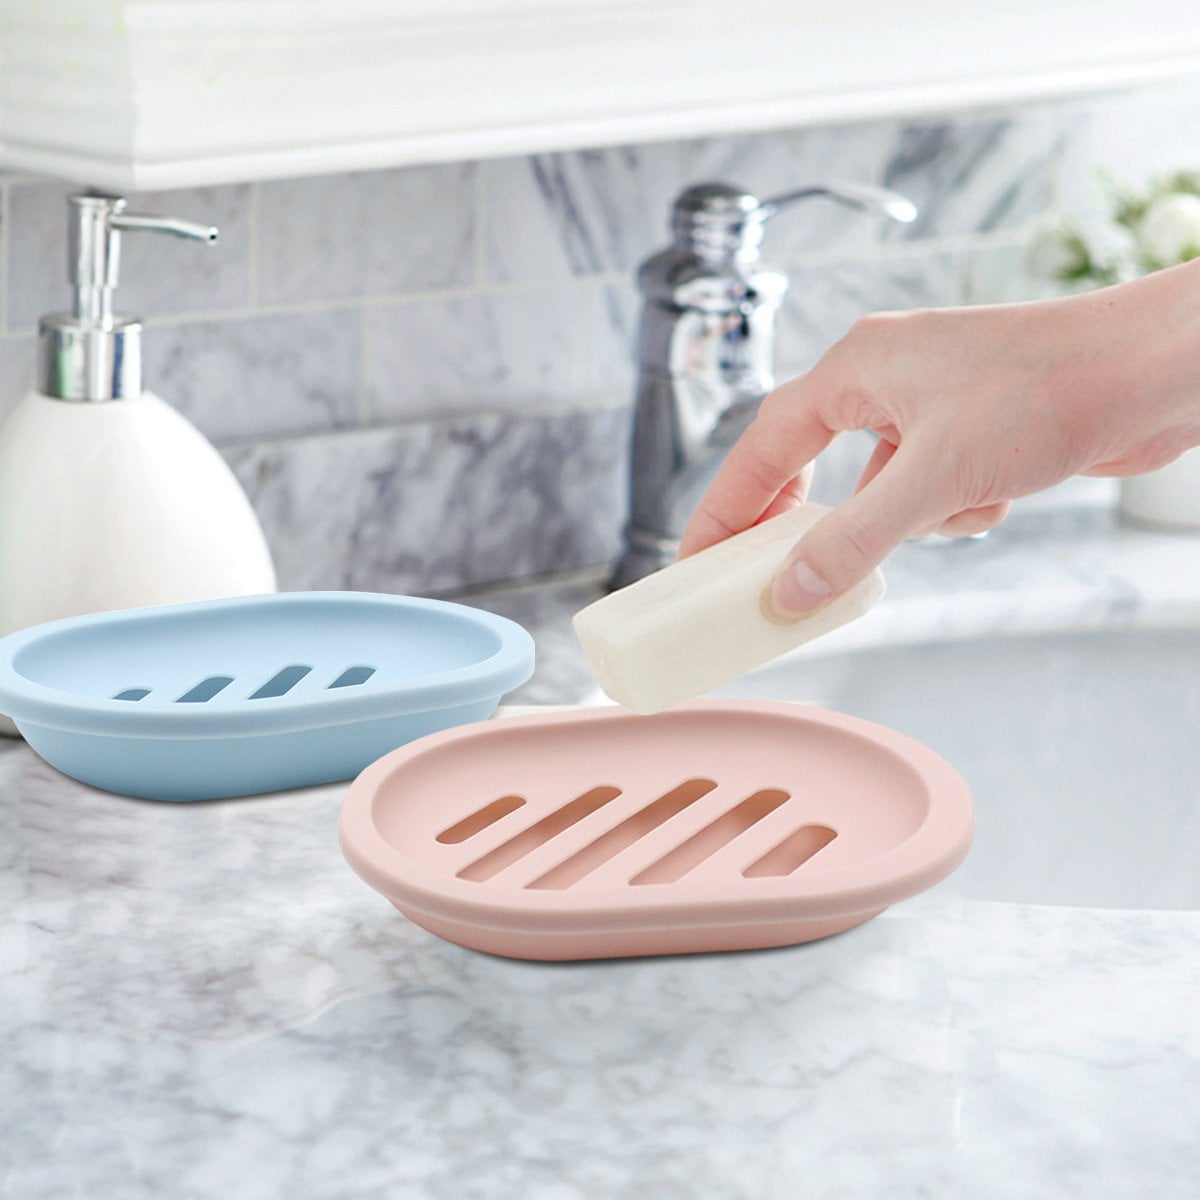 Ludlz 2pcs Soap Saver - Soap Dish & Soap Holder Shower Bar Soap Holder Quickly Drains Water, Circulates Air, Extends Soap Life, Easy to Clean, Fits